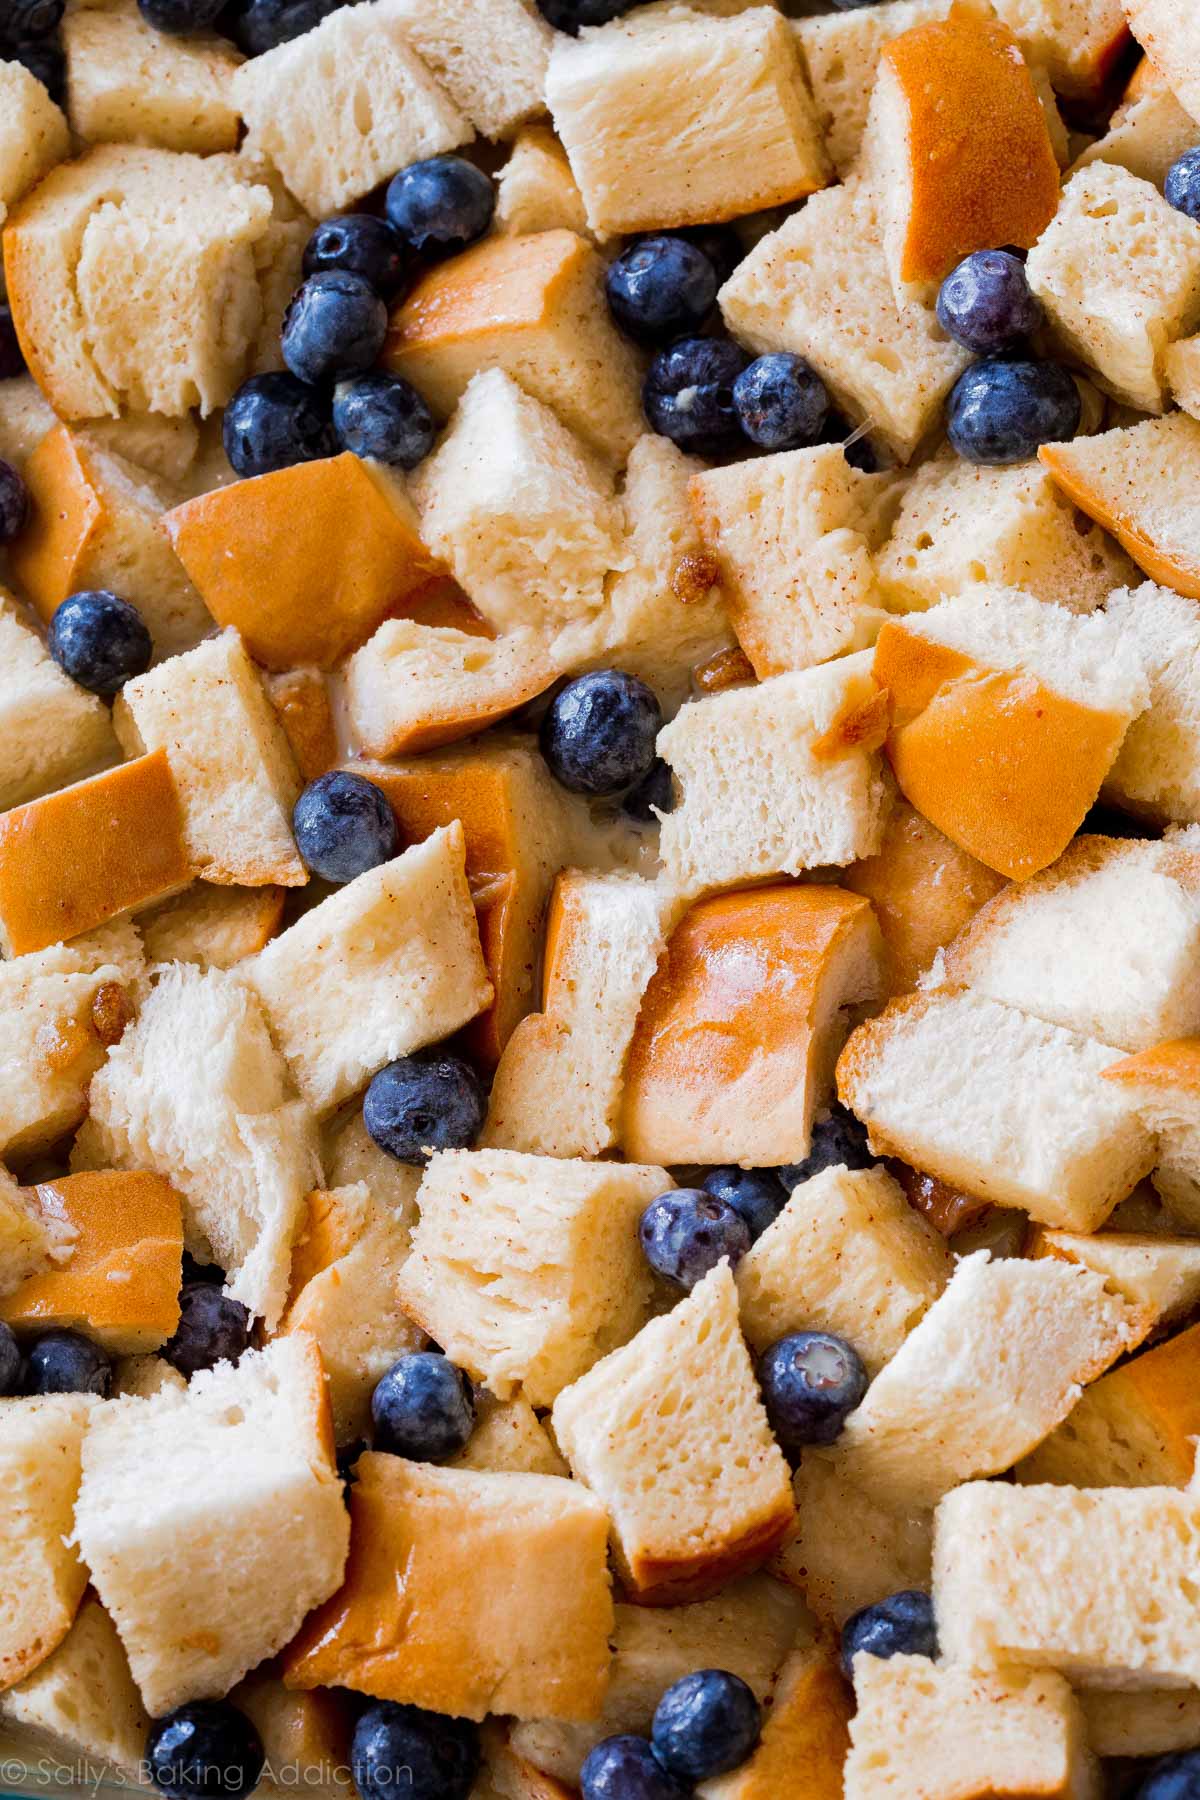 zoomed in image of bread and blueberries